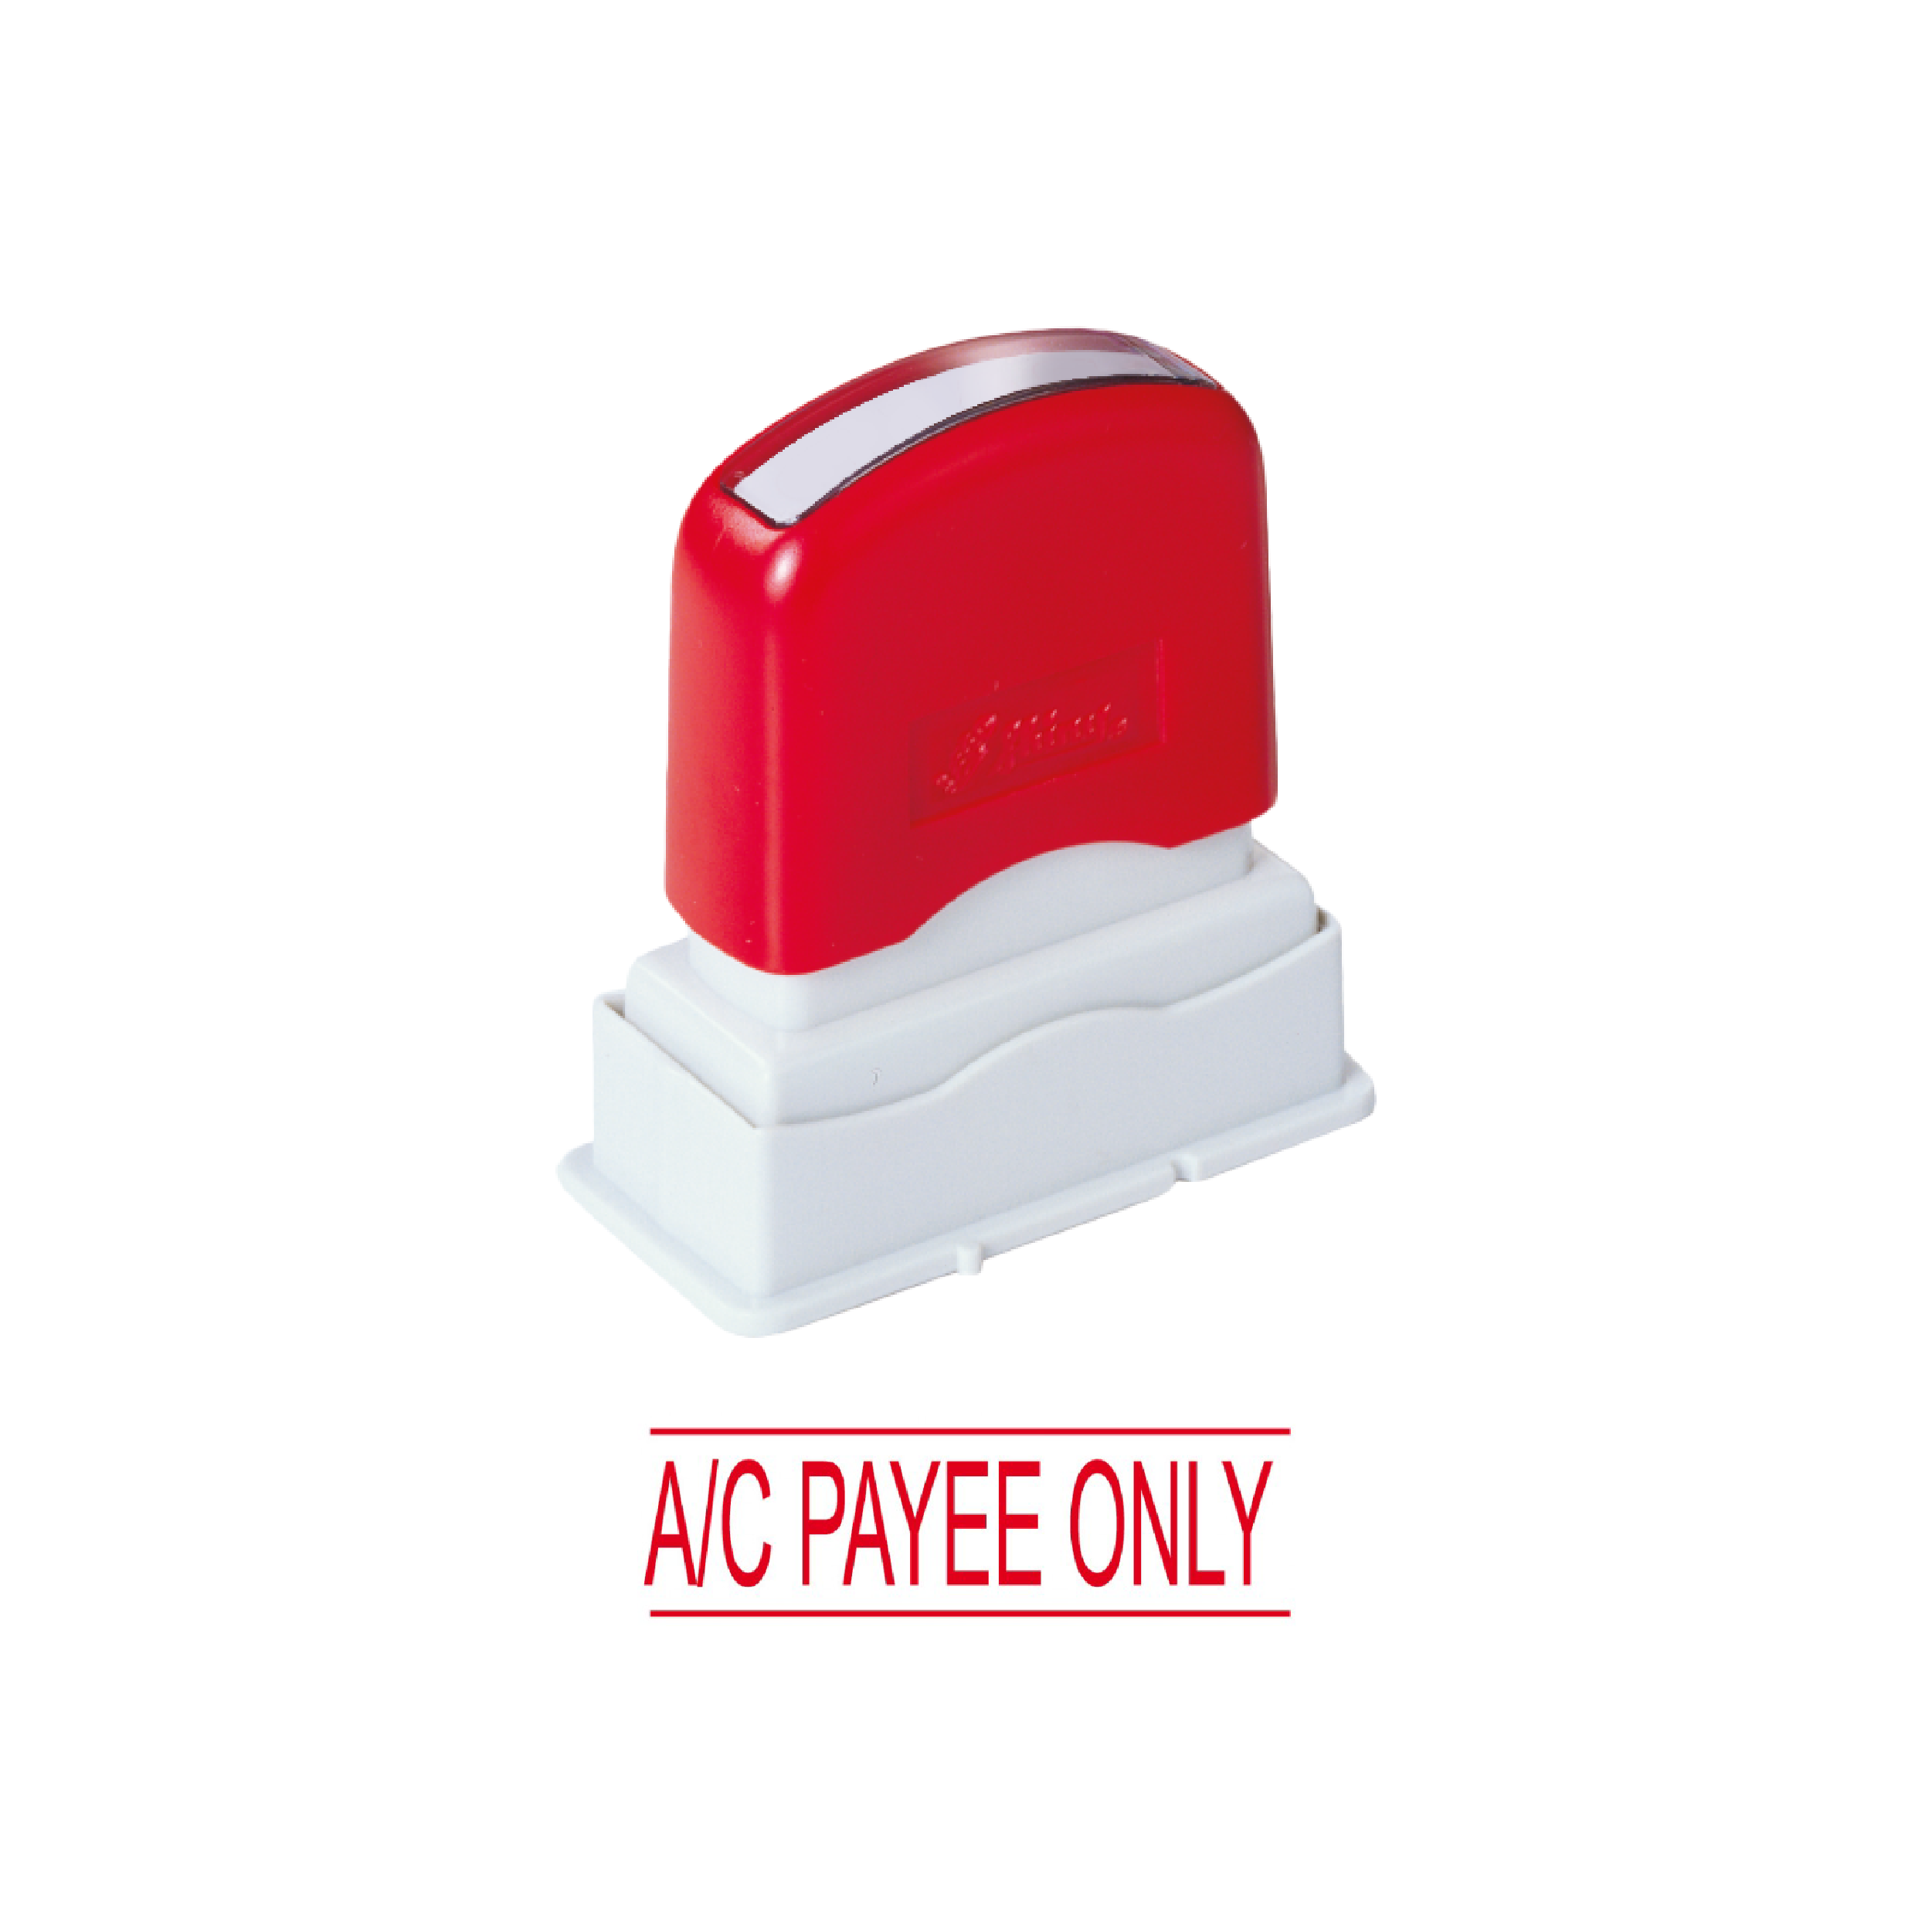 Shiny OA Pre-Inked Stamp, A/C PAYEE ONLY (EN124)